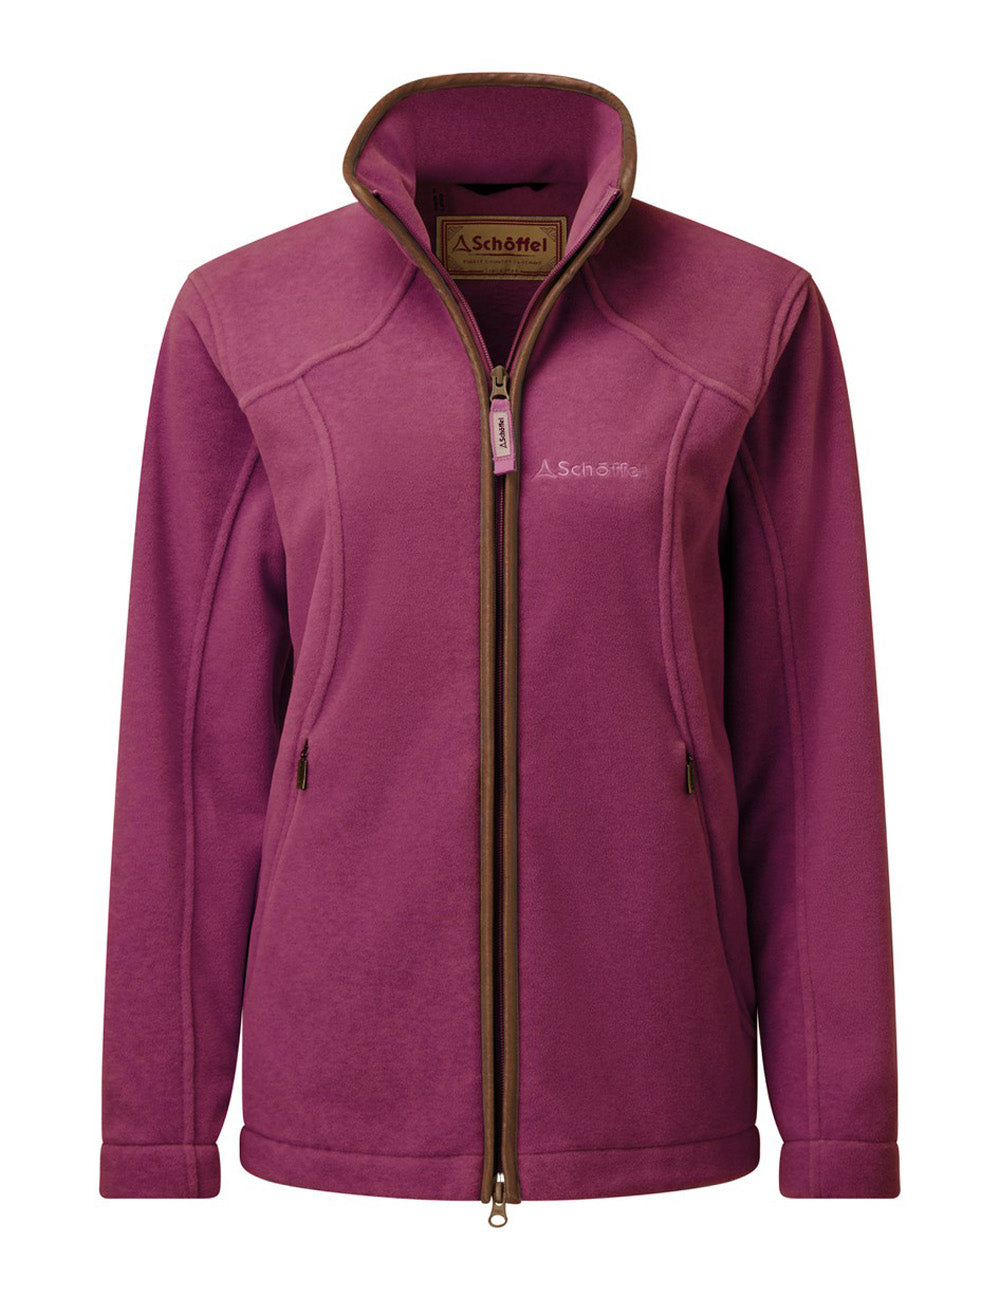 Schoffel's Burley Fleece Jacket in Mulberry on a white background